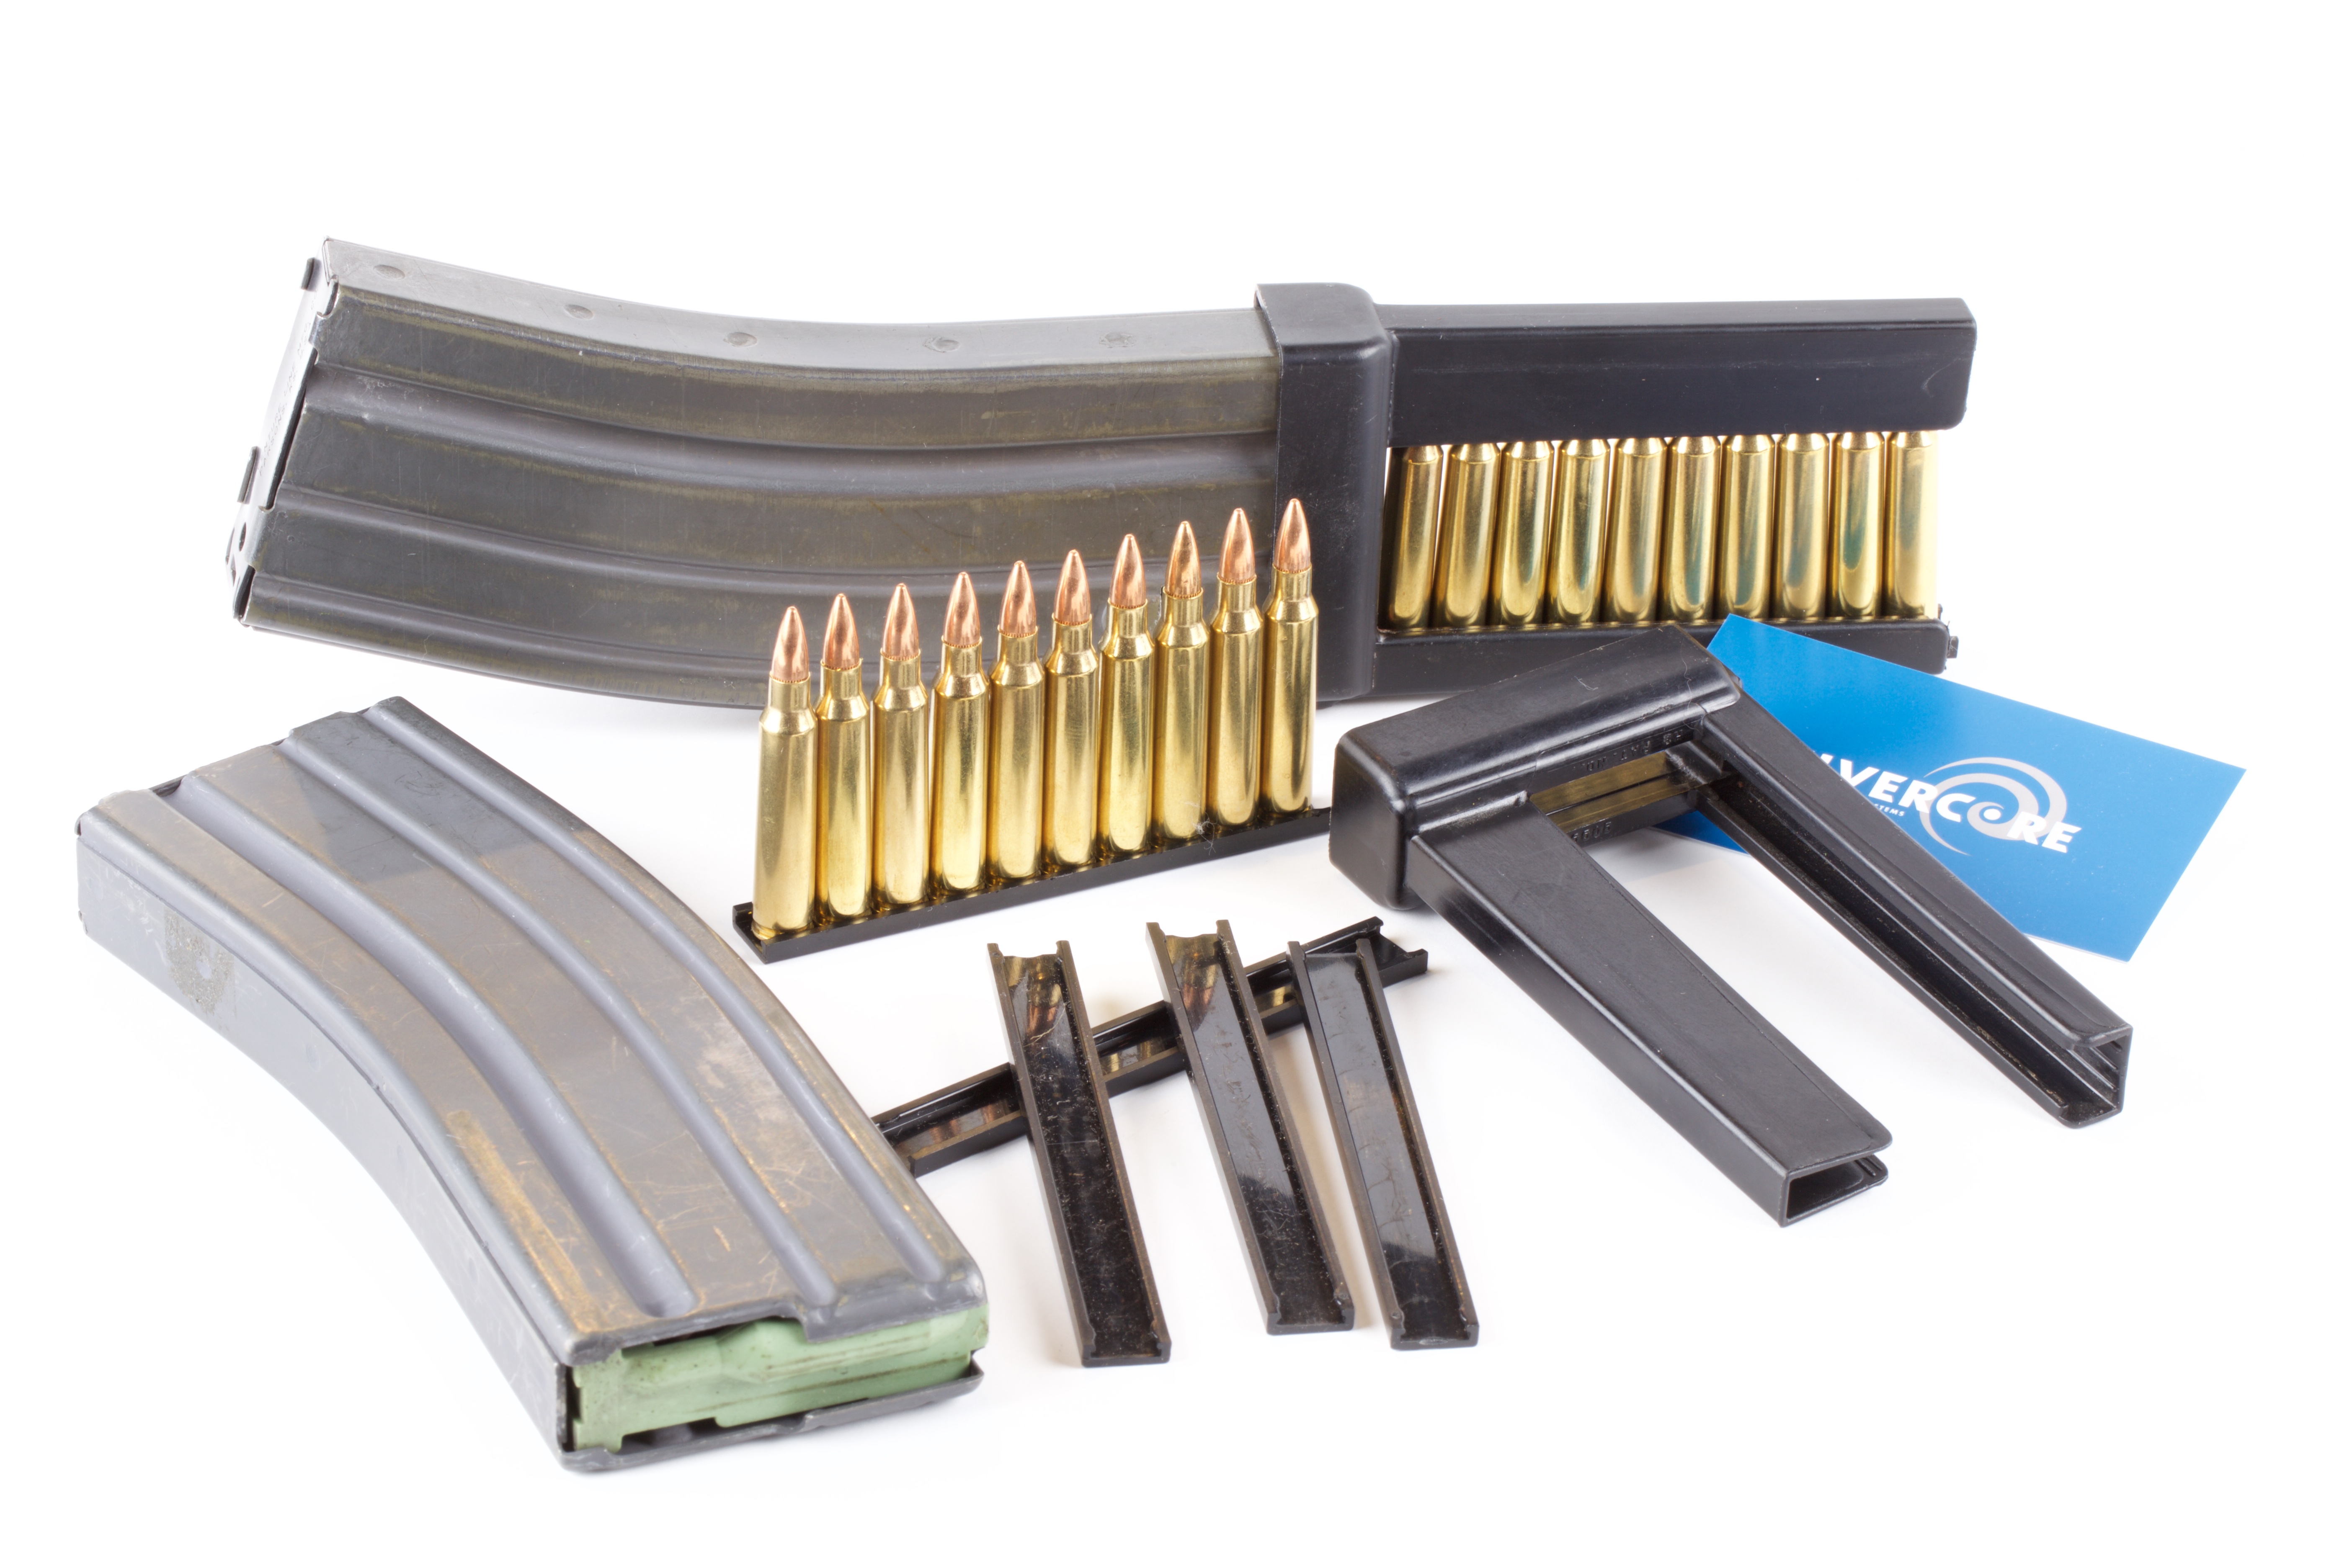 Clips for the AR-15 - Striper Clips & Magazine Loader.